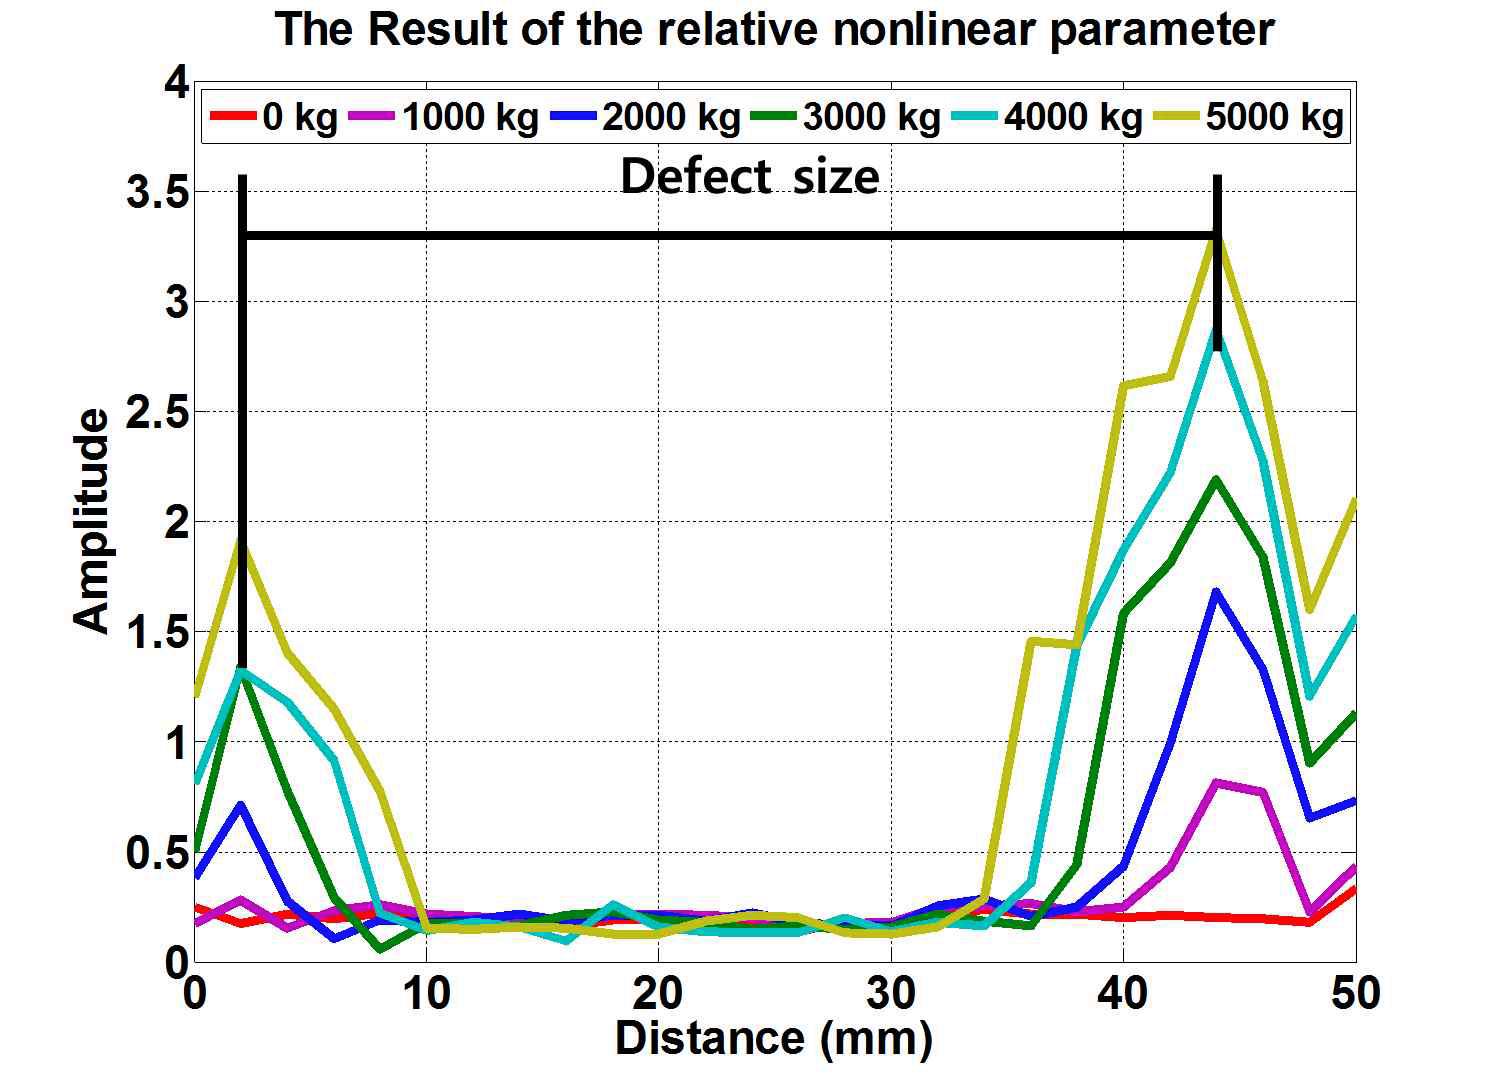 The result of the relative nonlinear parameter at specimen No. 1